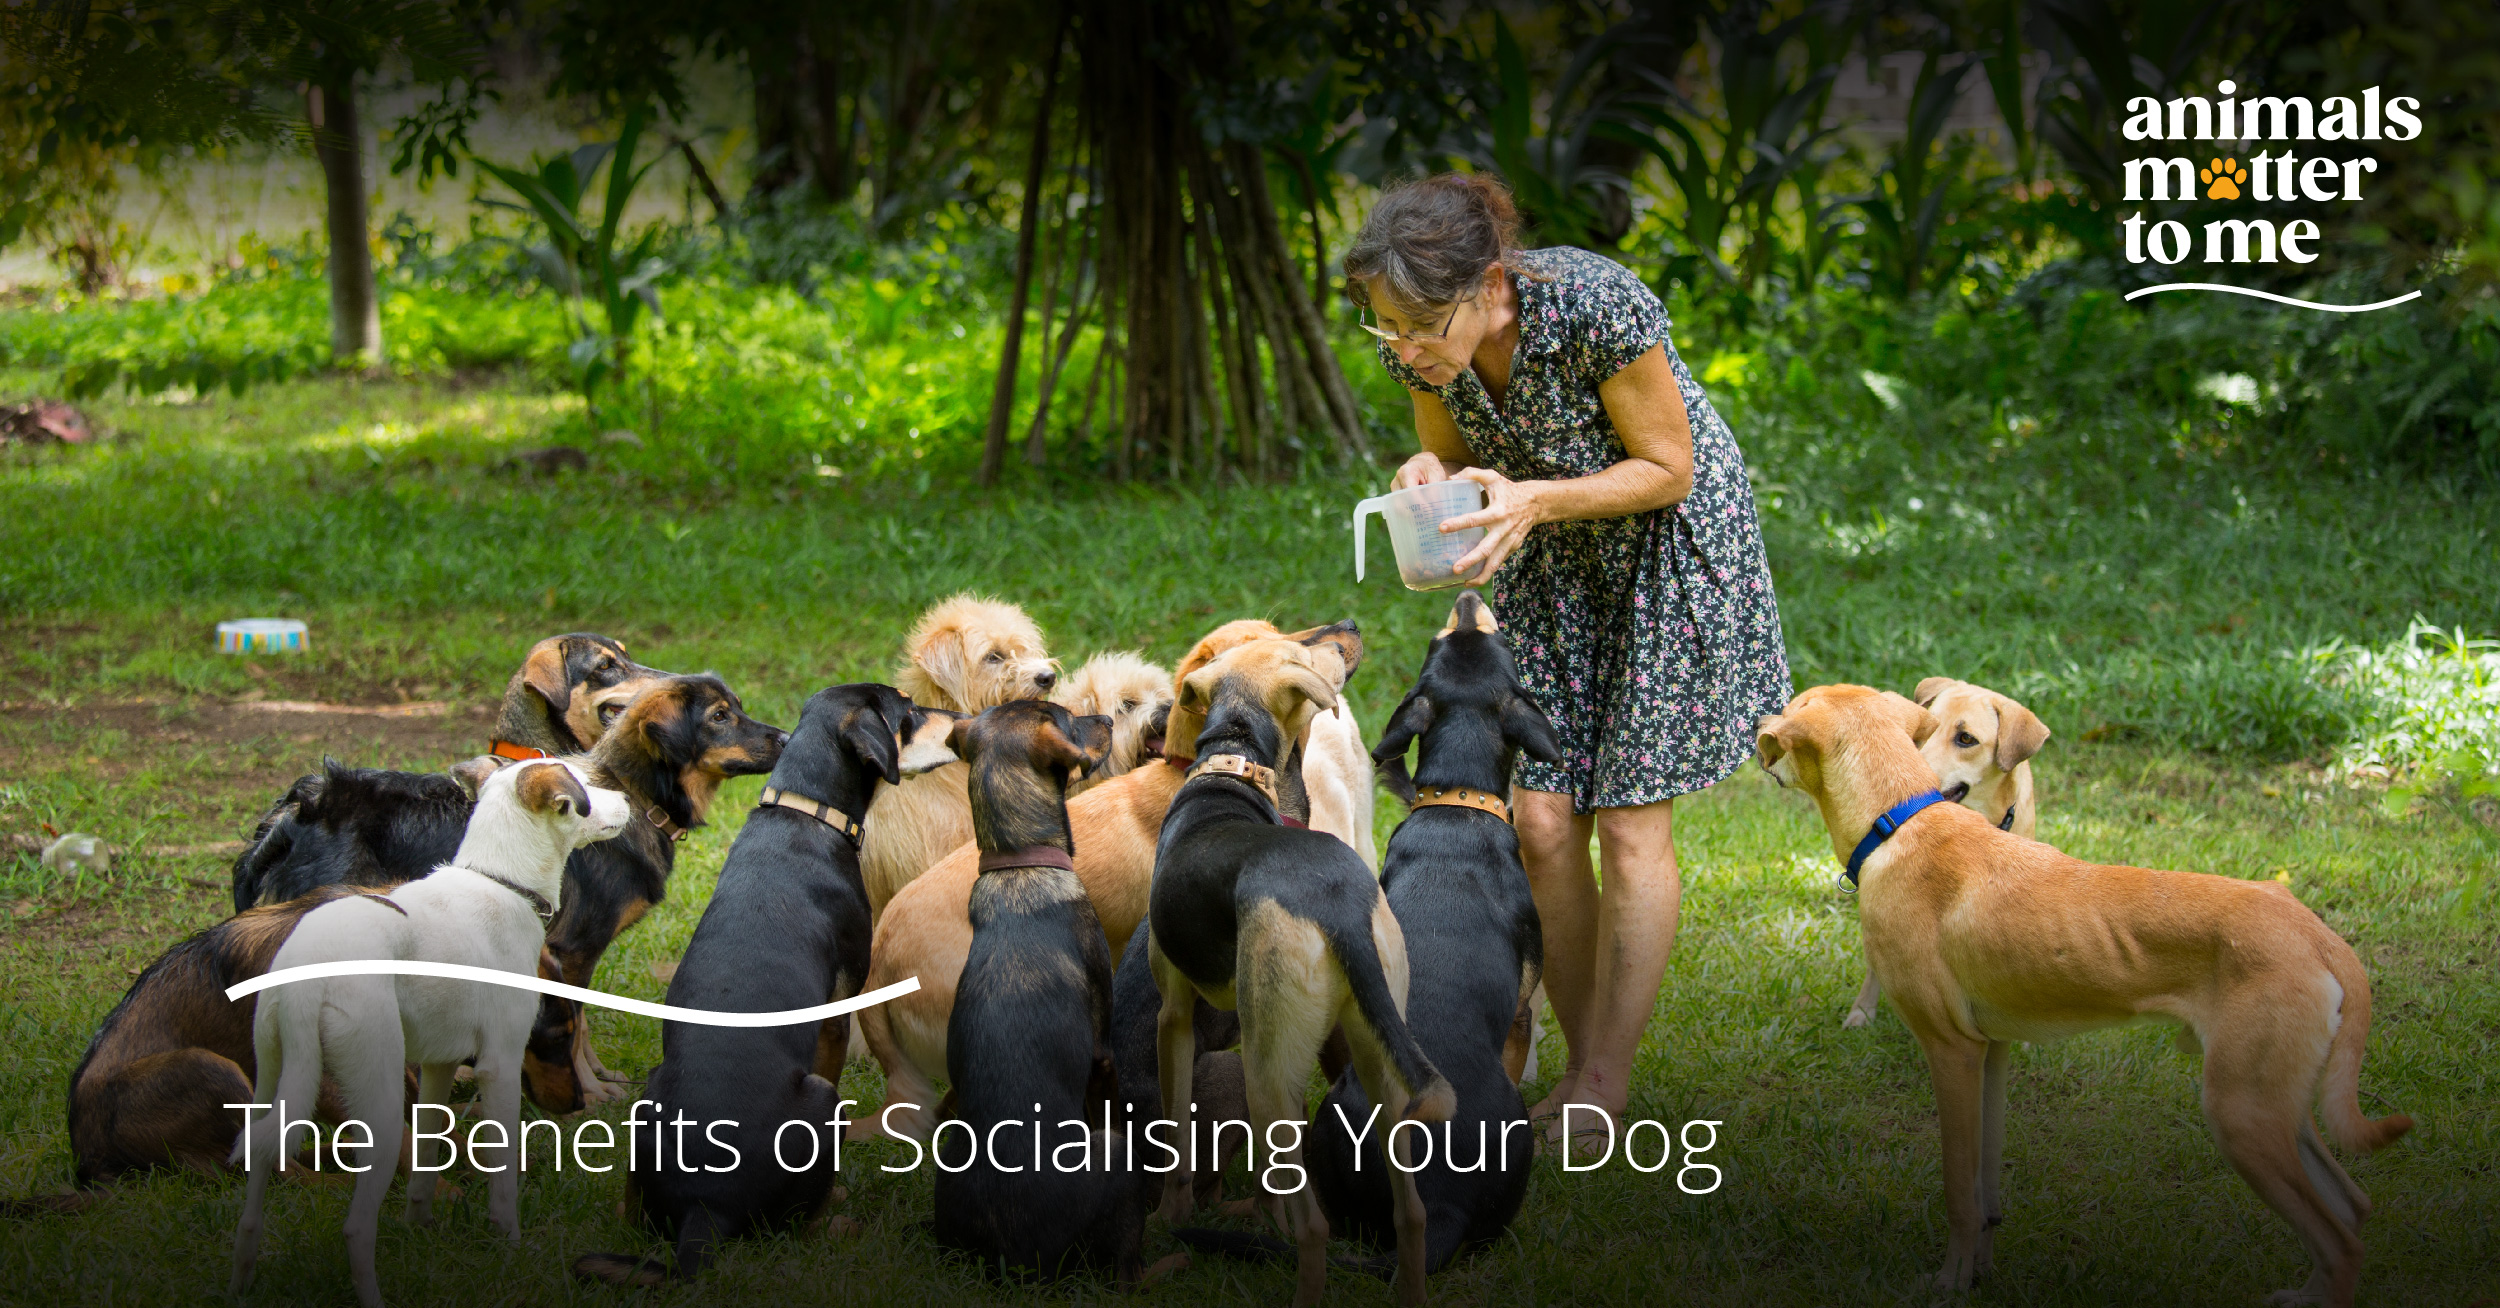 The Benefits of Socialising Your Dog